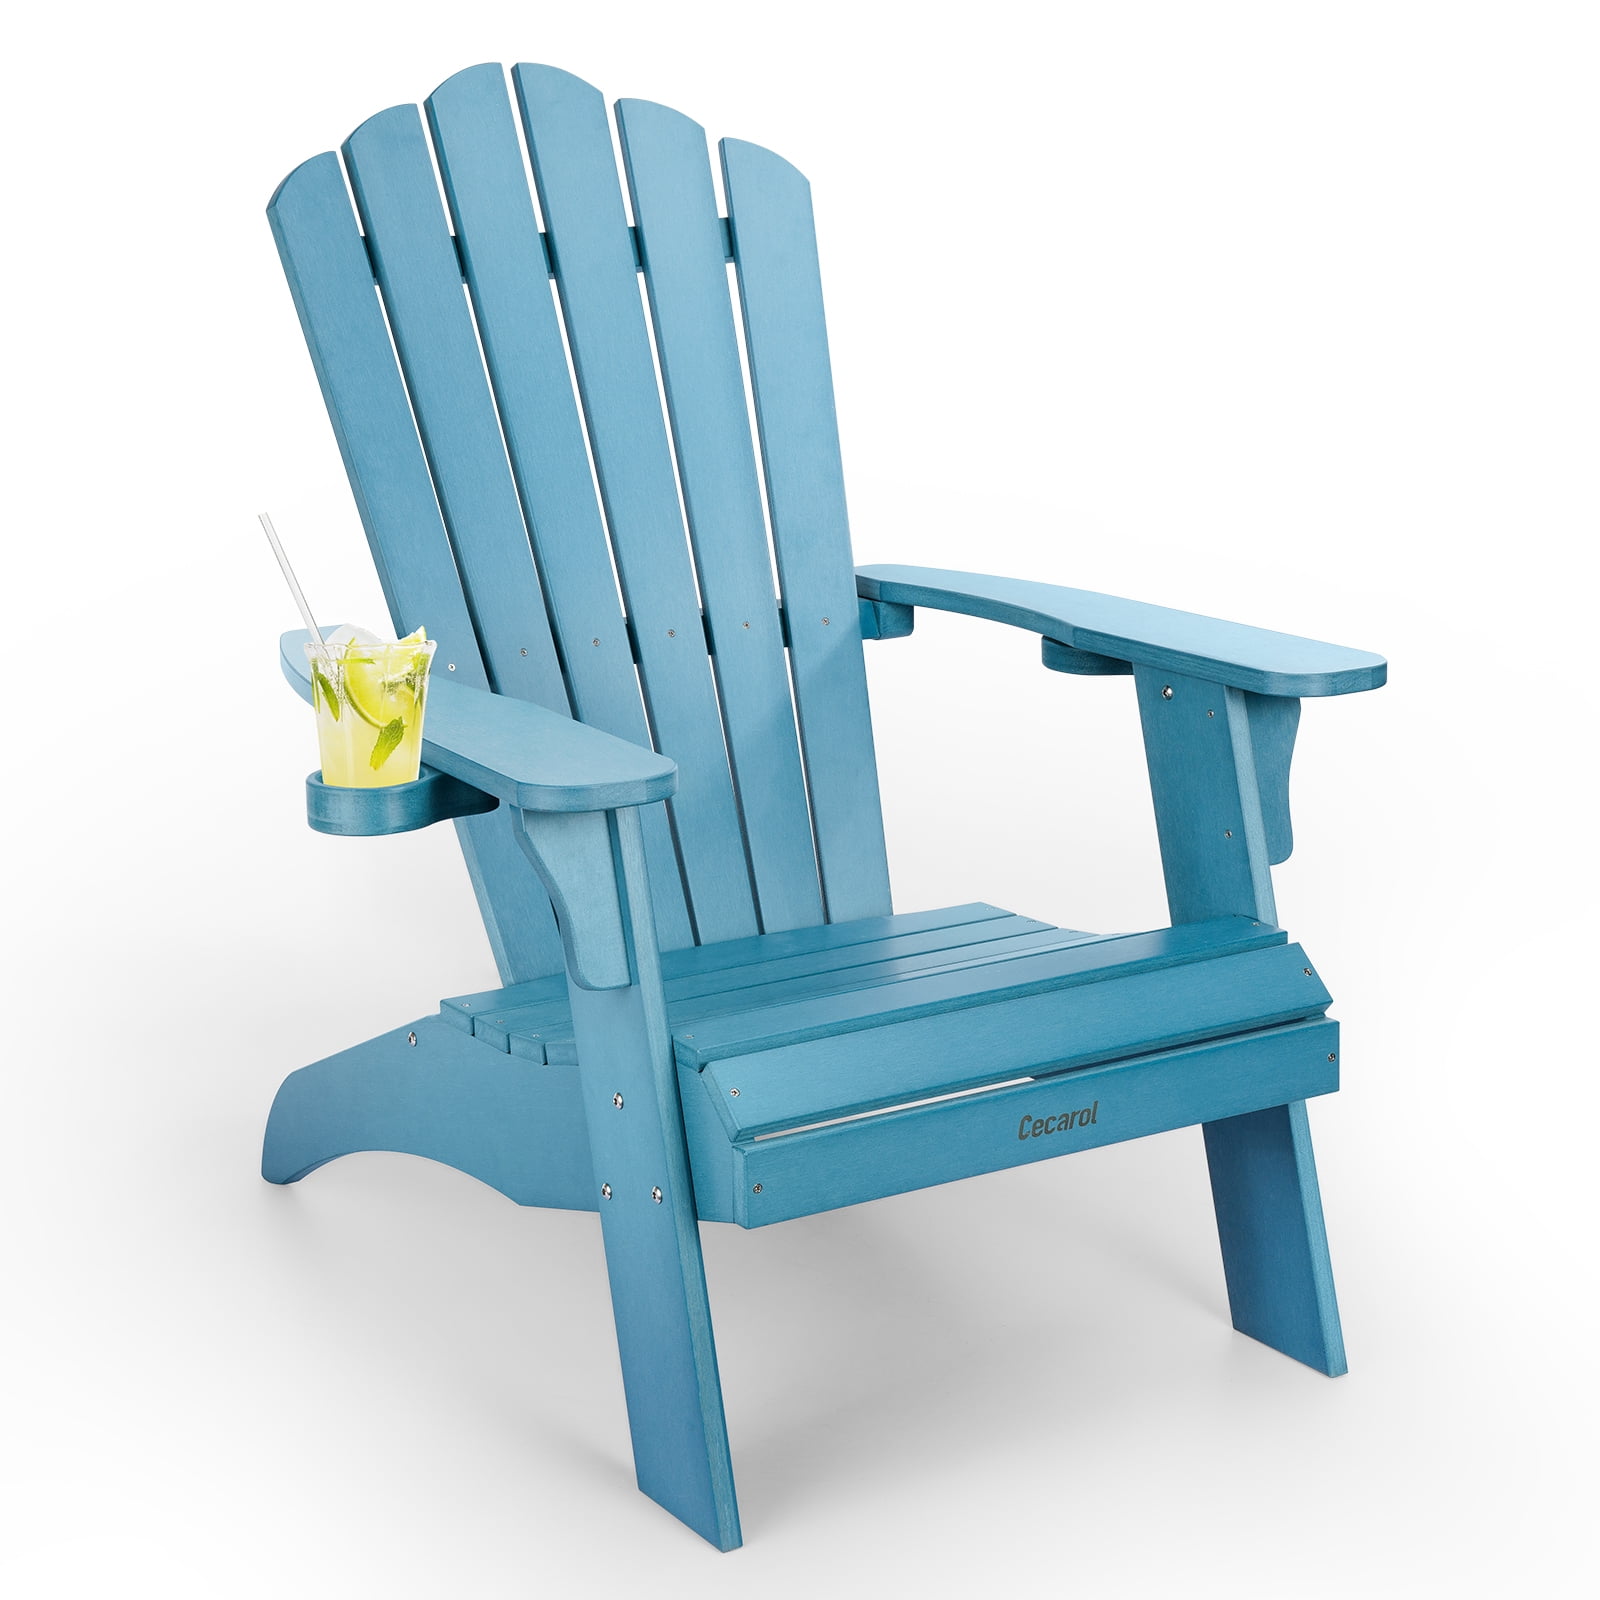 Poly Lumber Patio Fire Pit Chair with 2 Cup Holders 385lb Weight Capacity Cecarol Oversized Adirondack Chair Garden- Blue Lawn All Weather Resistant and Durable Outdoor Chairs for Poolside 